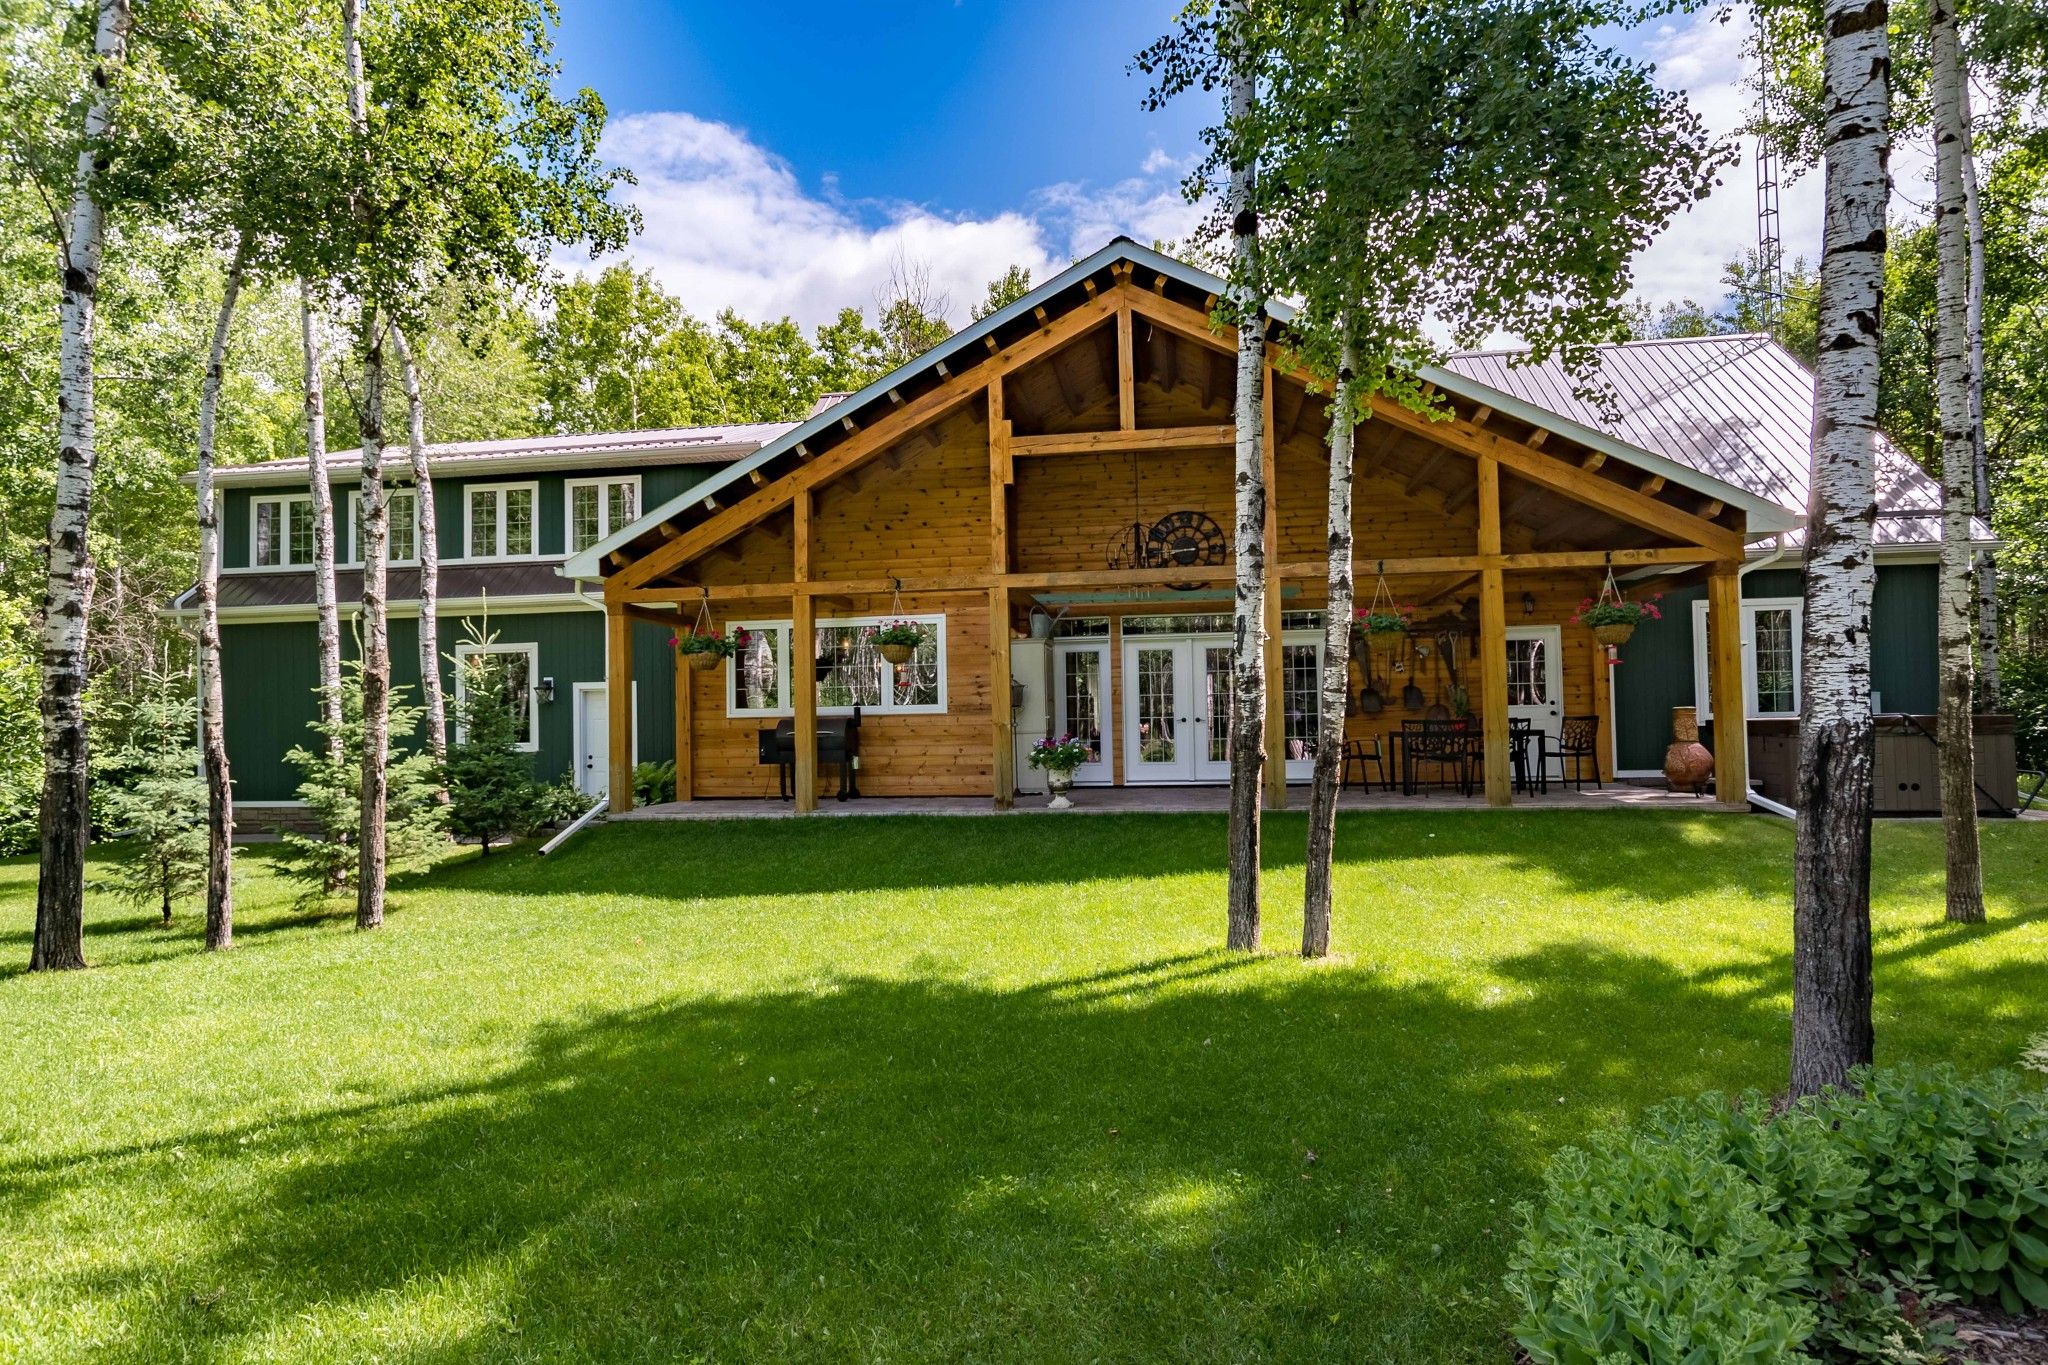 PRIDE OF OWNERSHIP! Meticulously maintained 2500 sf 3 bedroom bungalow (2011), with metal roof, vaulted timber frame covered 40x12 patio, 25x24 AT2, fantastic 40x36 Workshop on a beautifully  landscaped mature treed 5 acre lot.